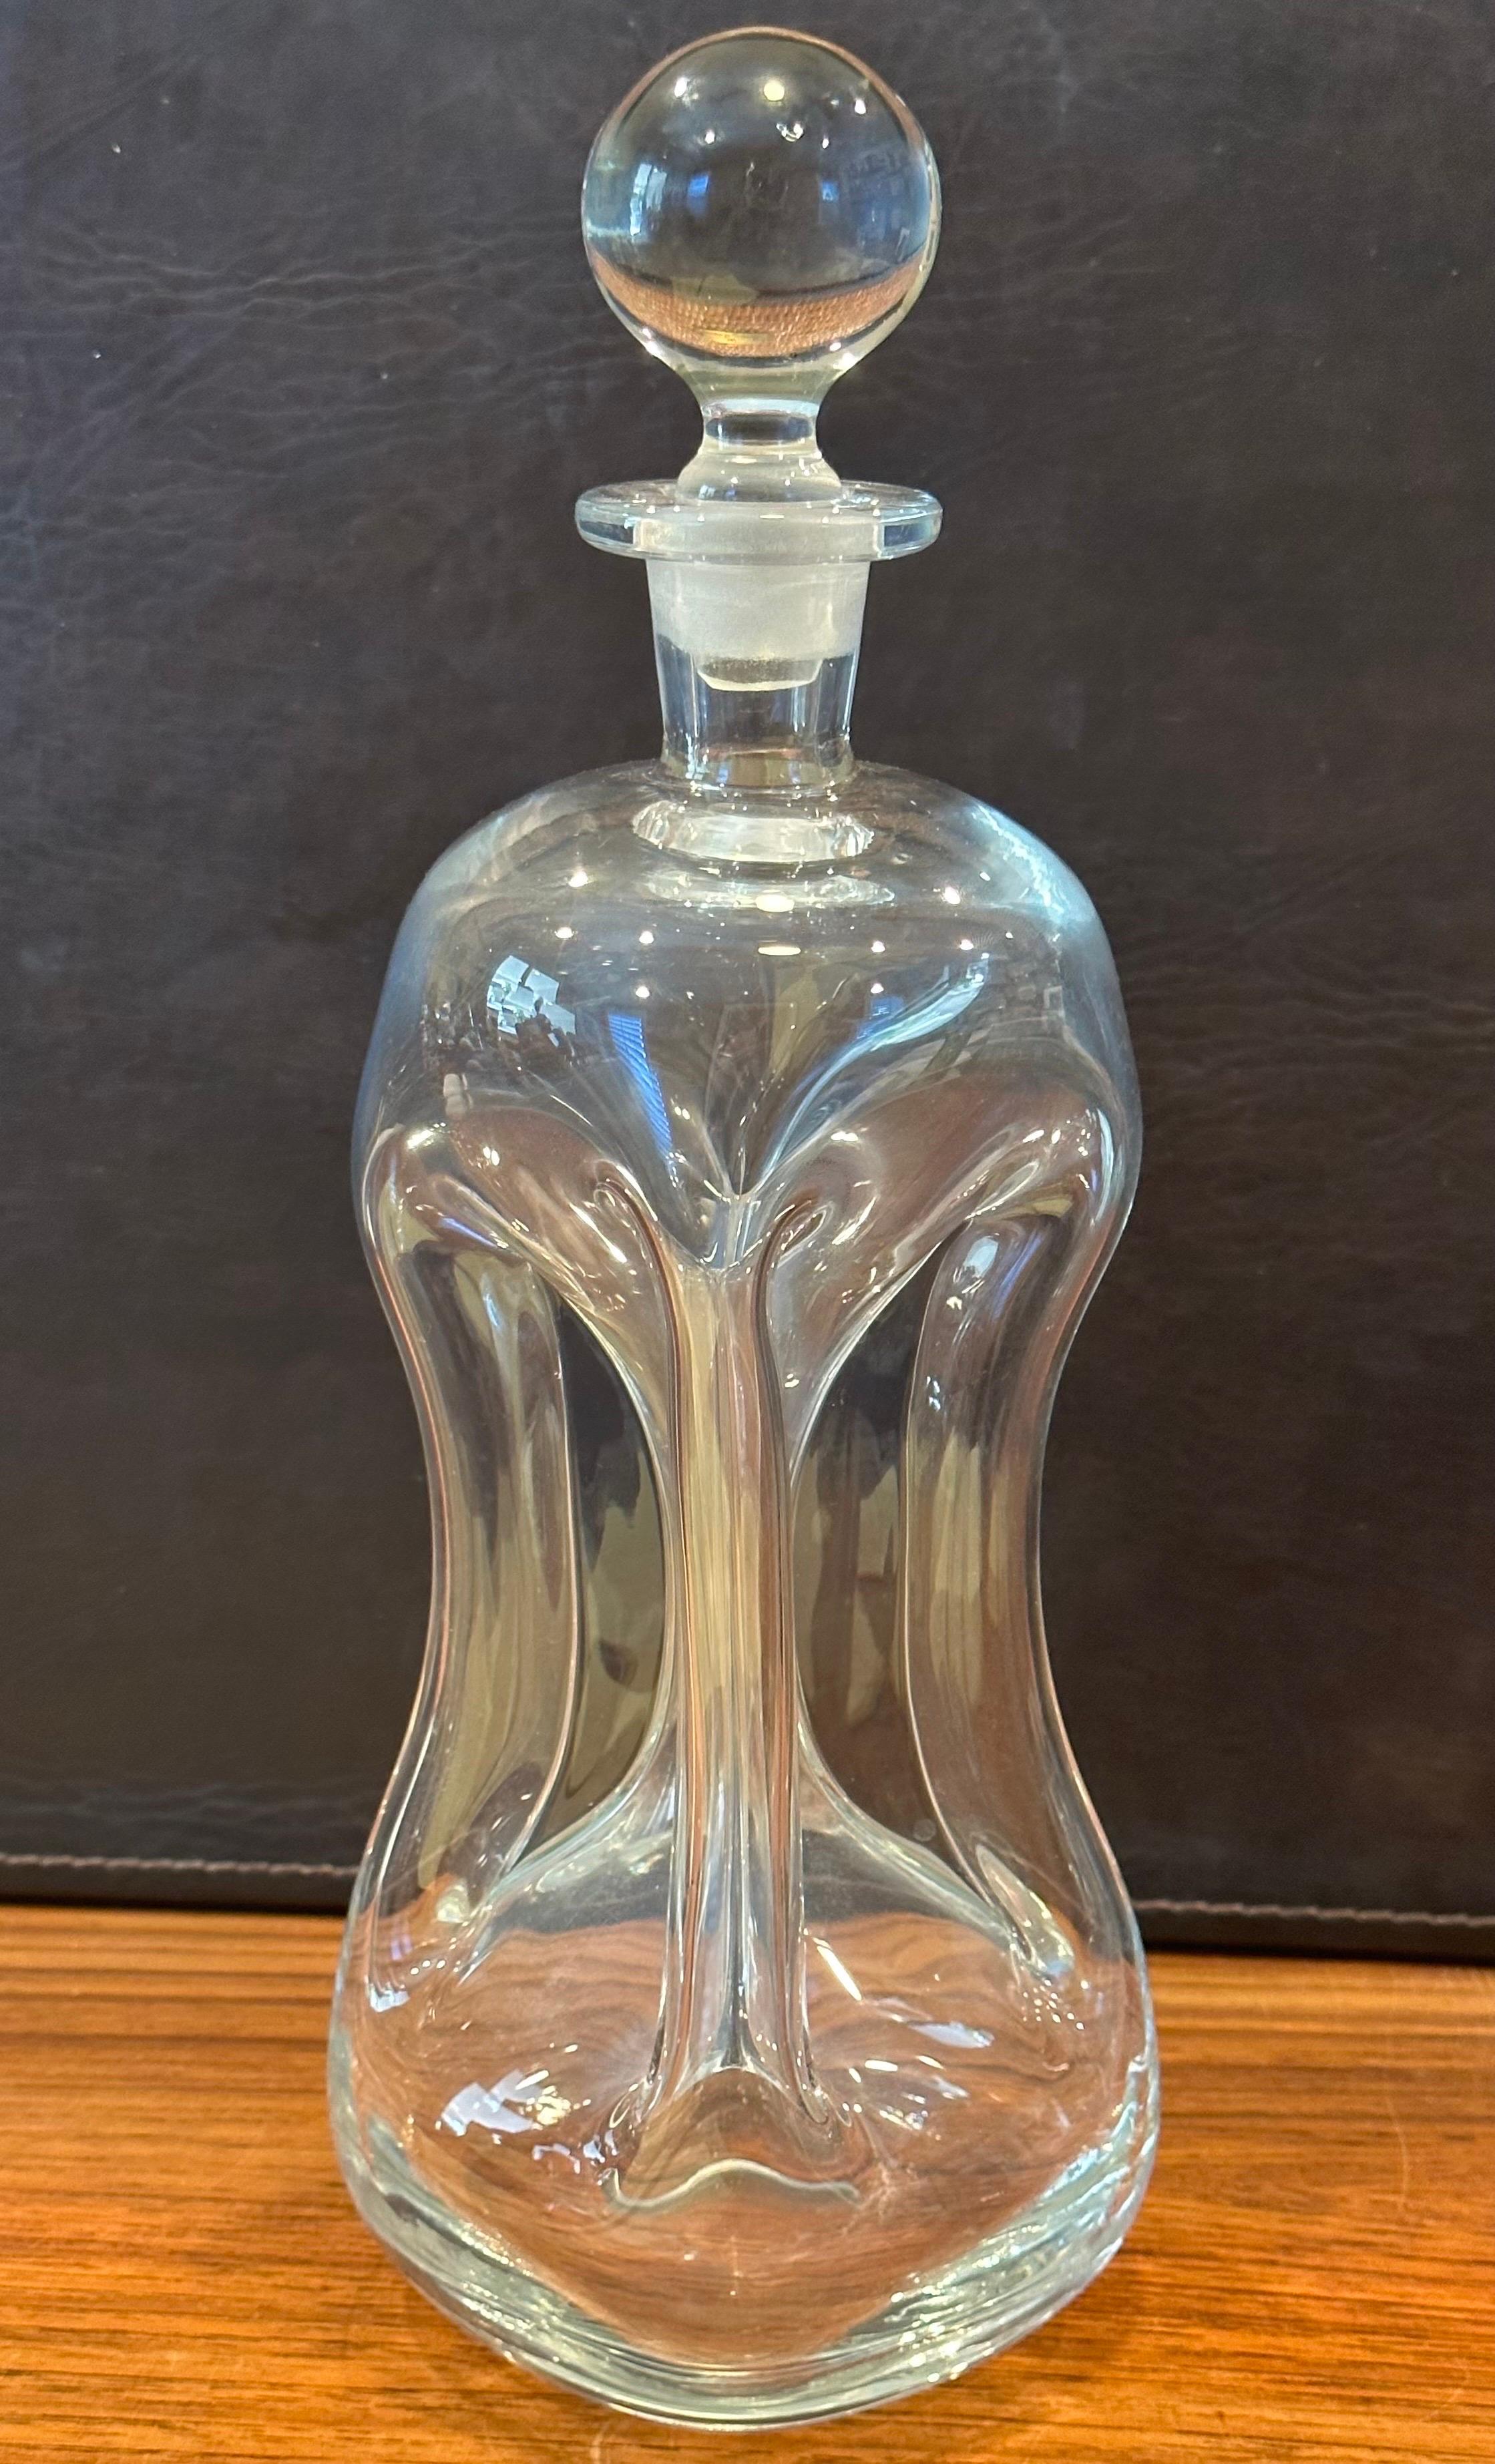 Mid-Century Modern Large Clear Glass Elsinore Kluk-Kluk Decanter by Holmegaard For Sale